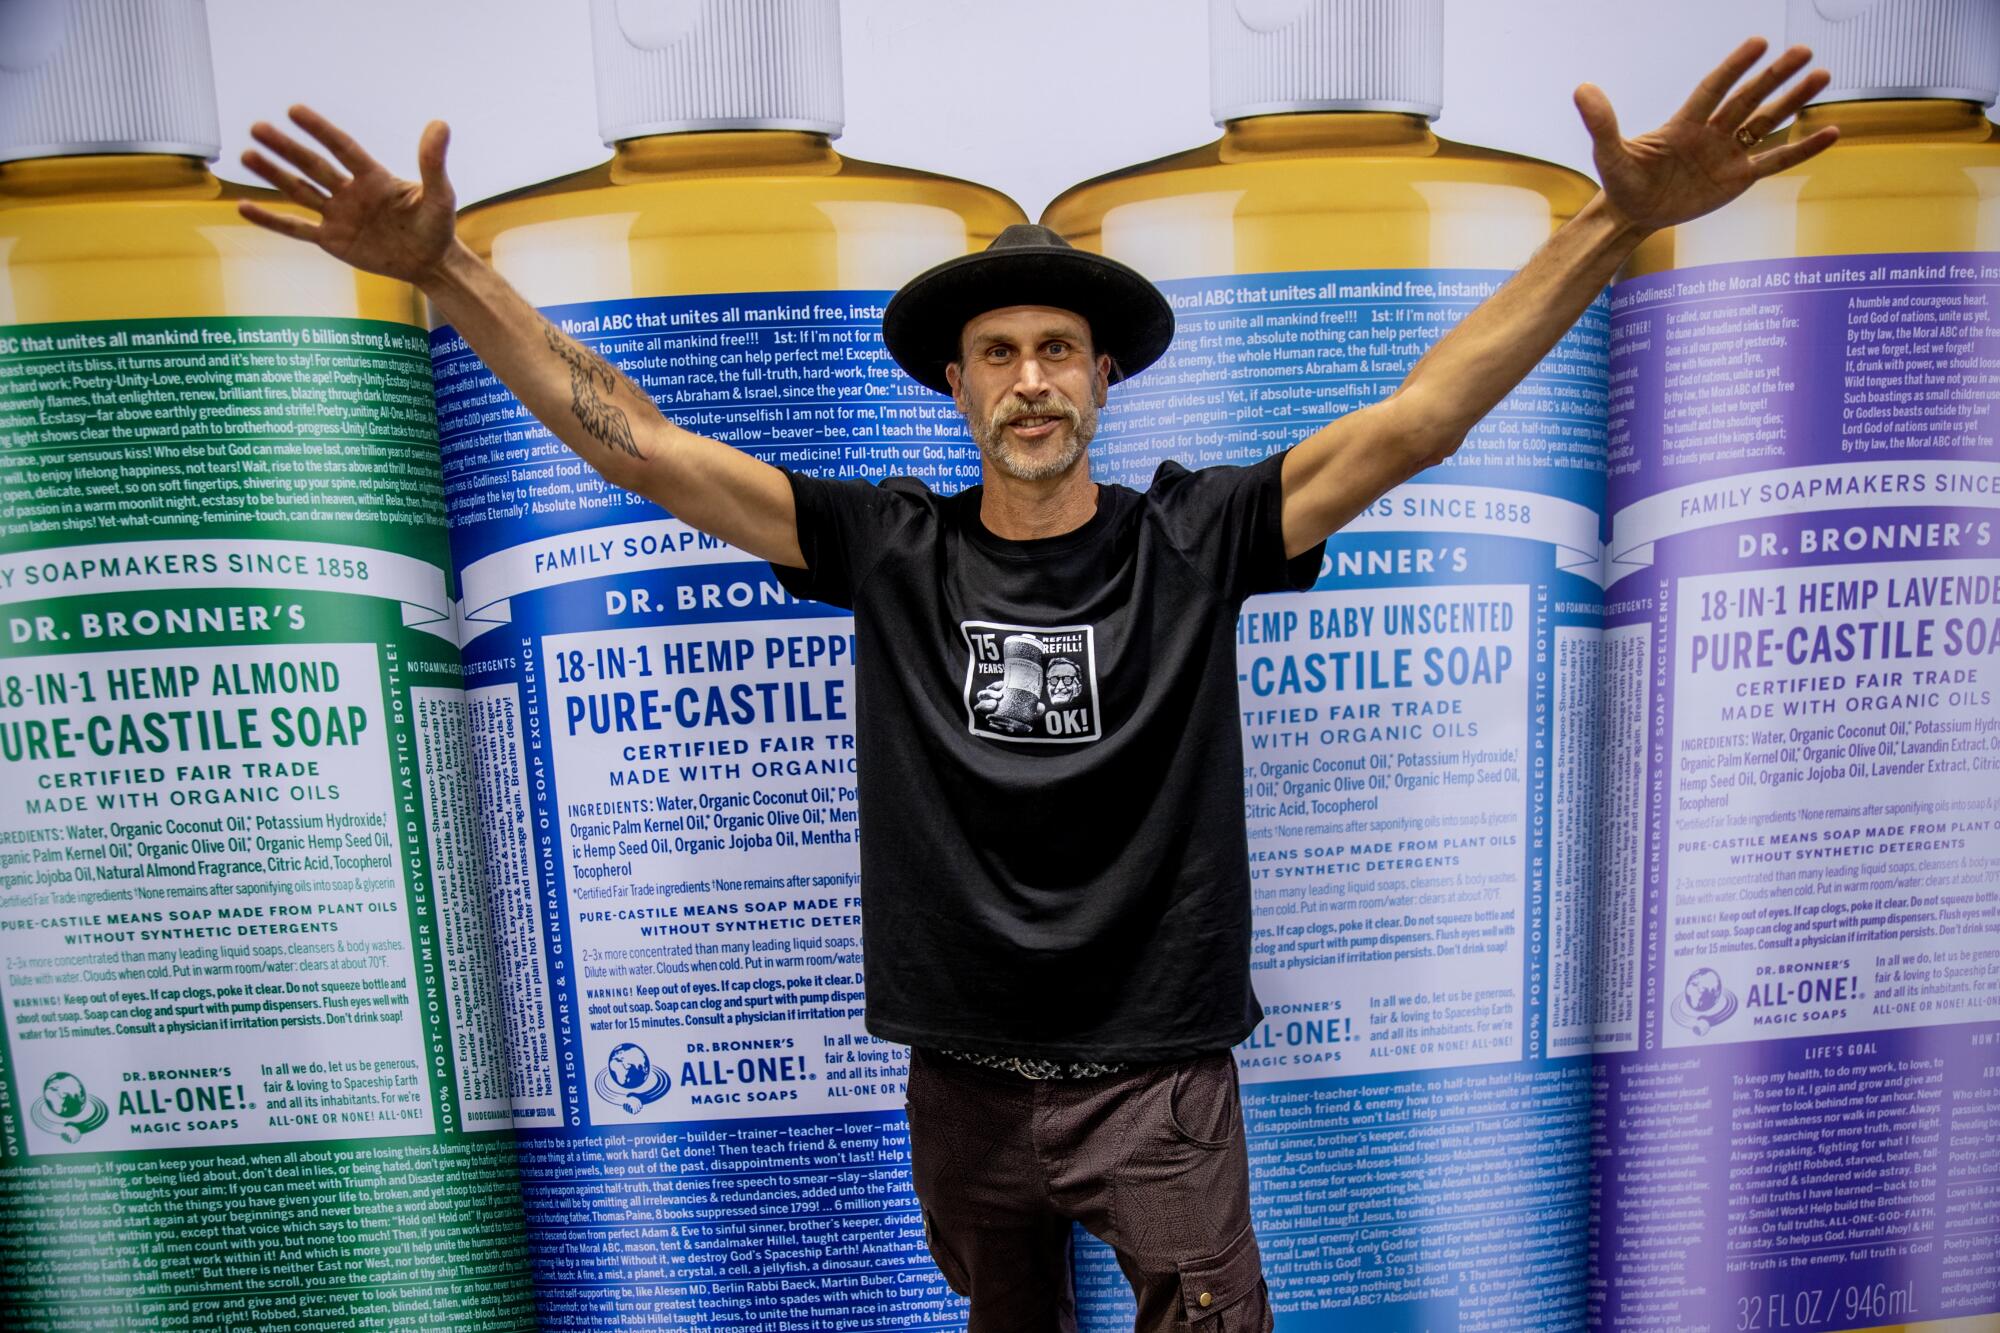 A man in a hat standing and raising both arms in front of an enlarged photo of bottles of Dr. Bronner's soap.